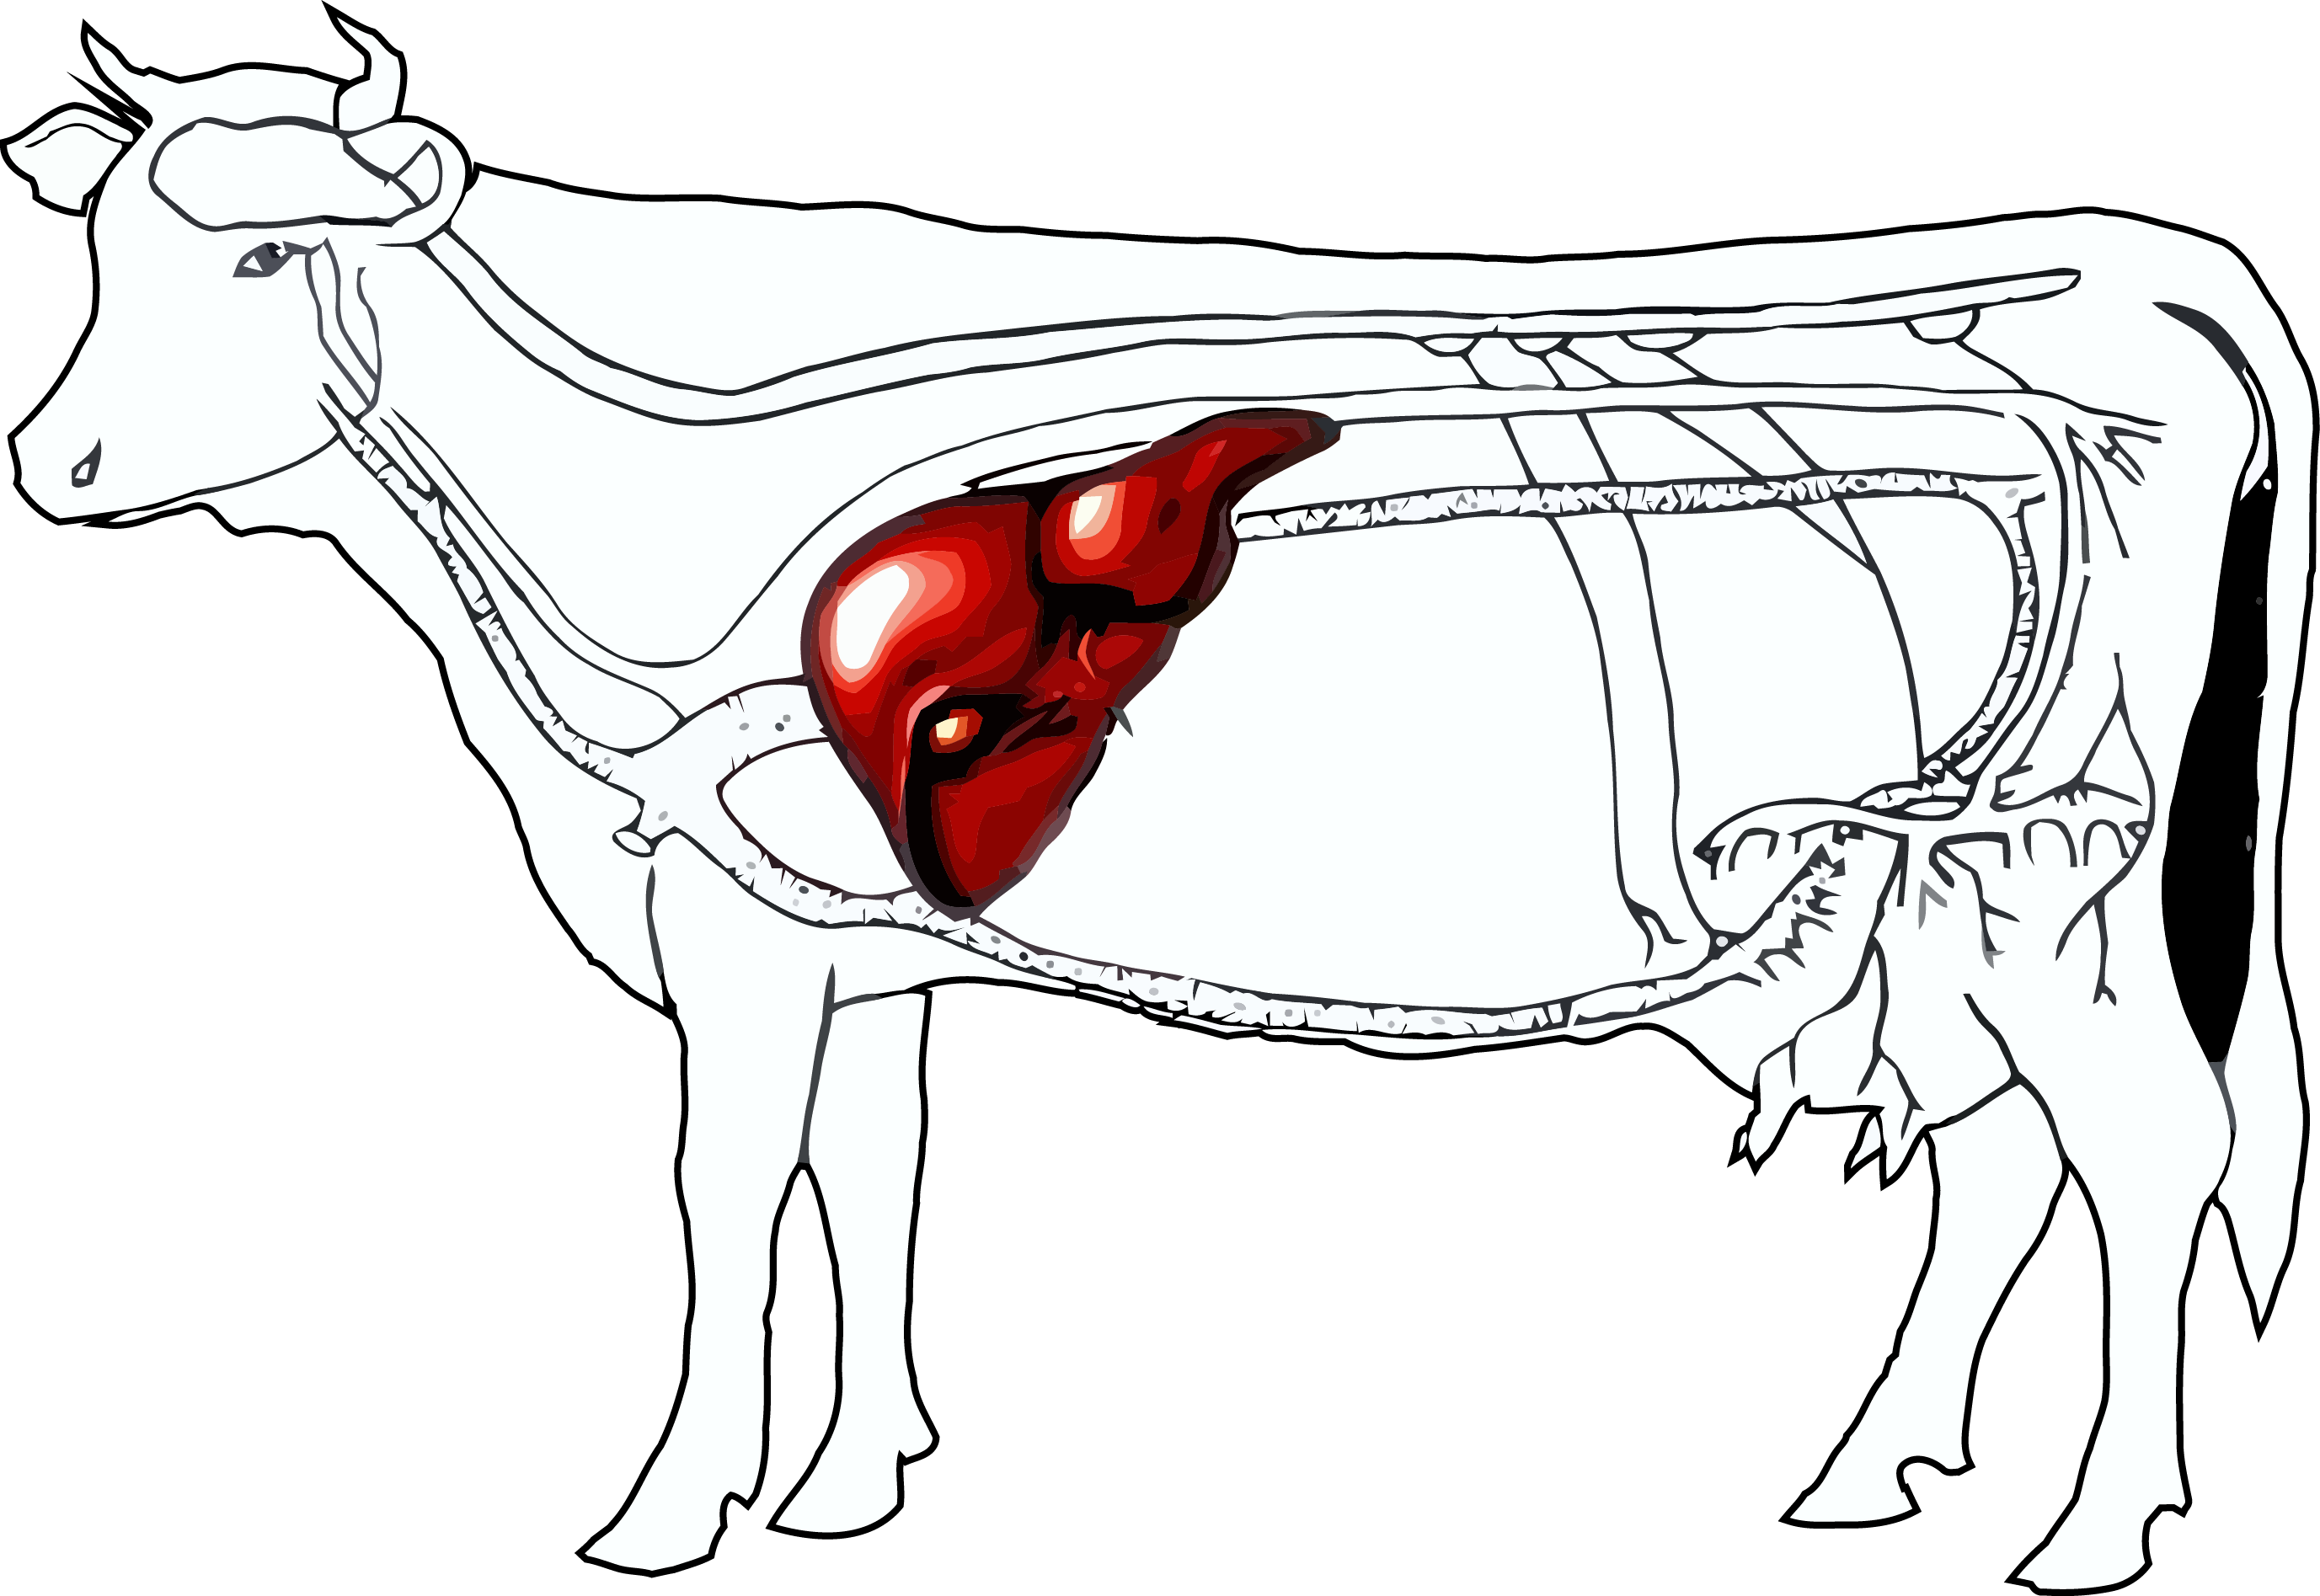 Liver clipart beef liver. Cattle and onions horse